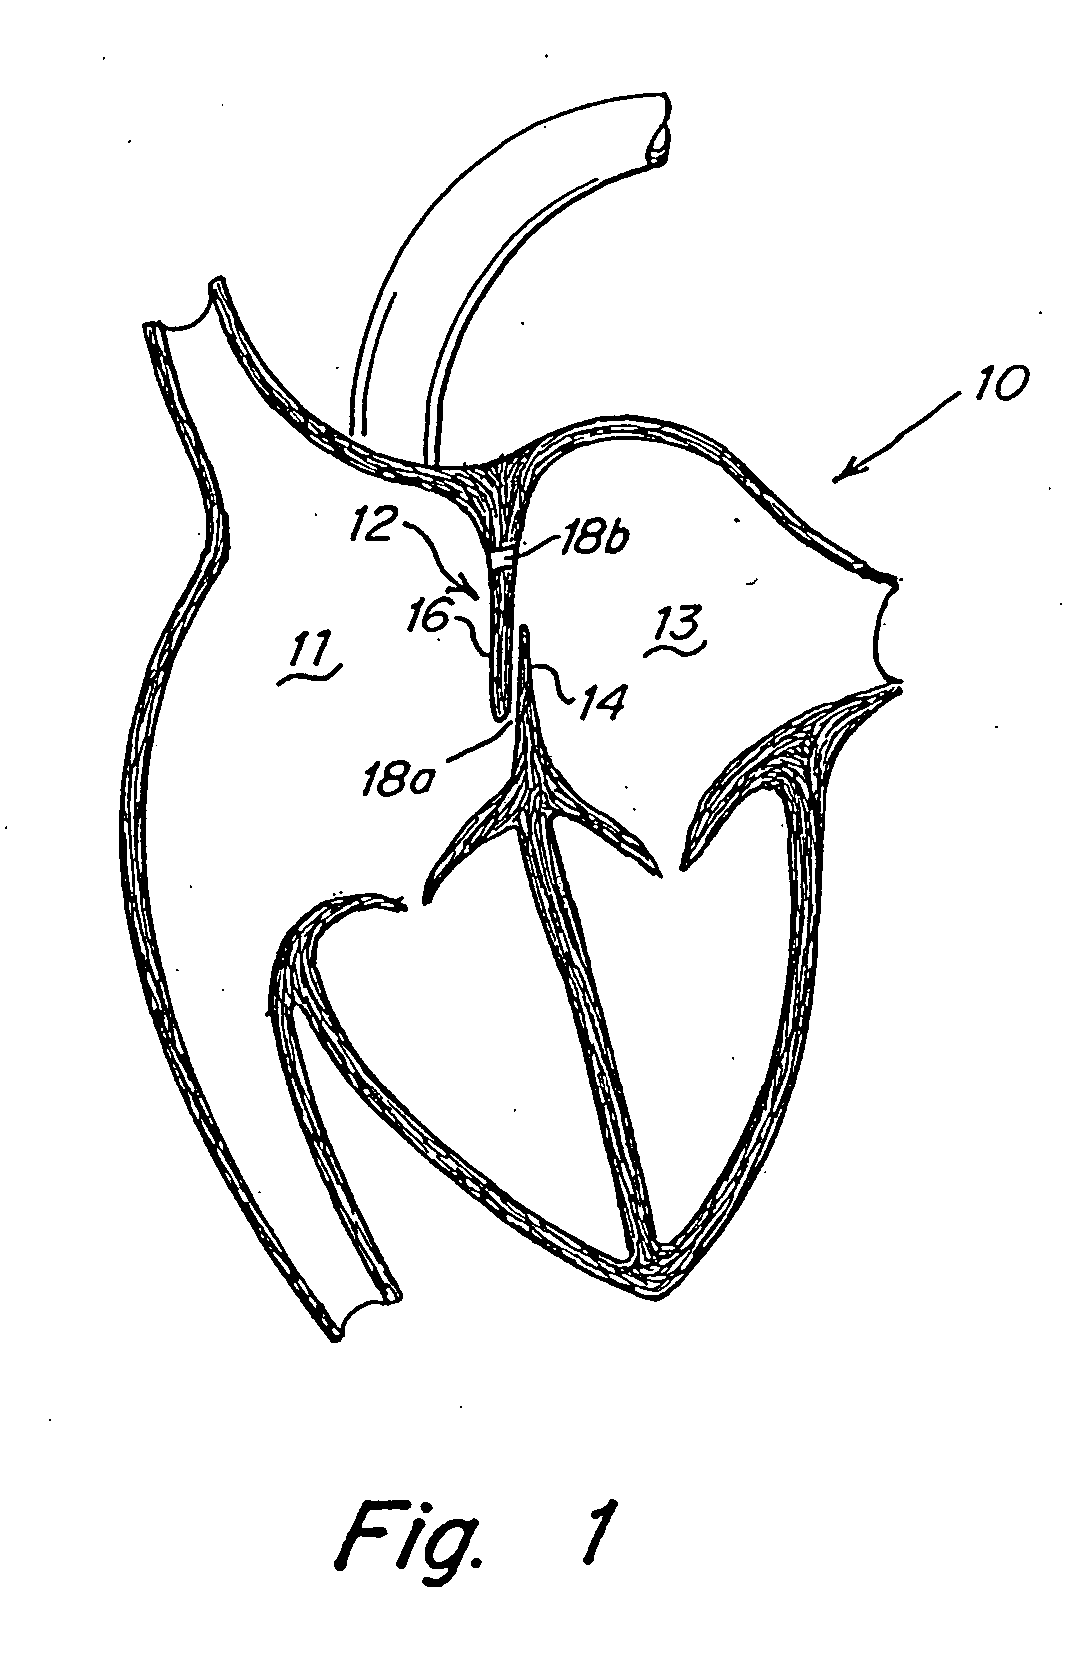 Patent foramen ovale (PFO) closure device with linearly elongating petals